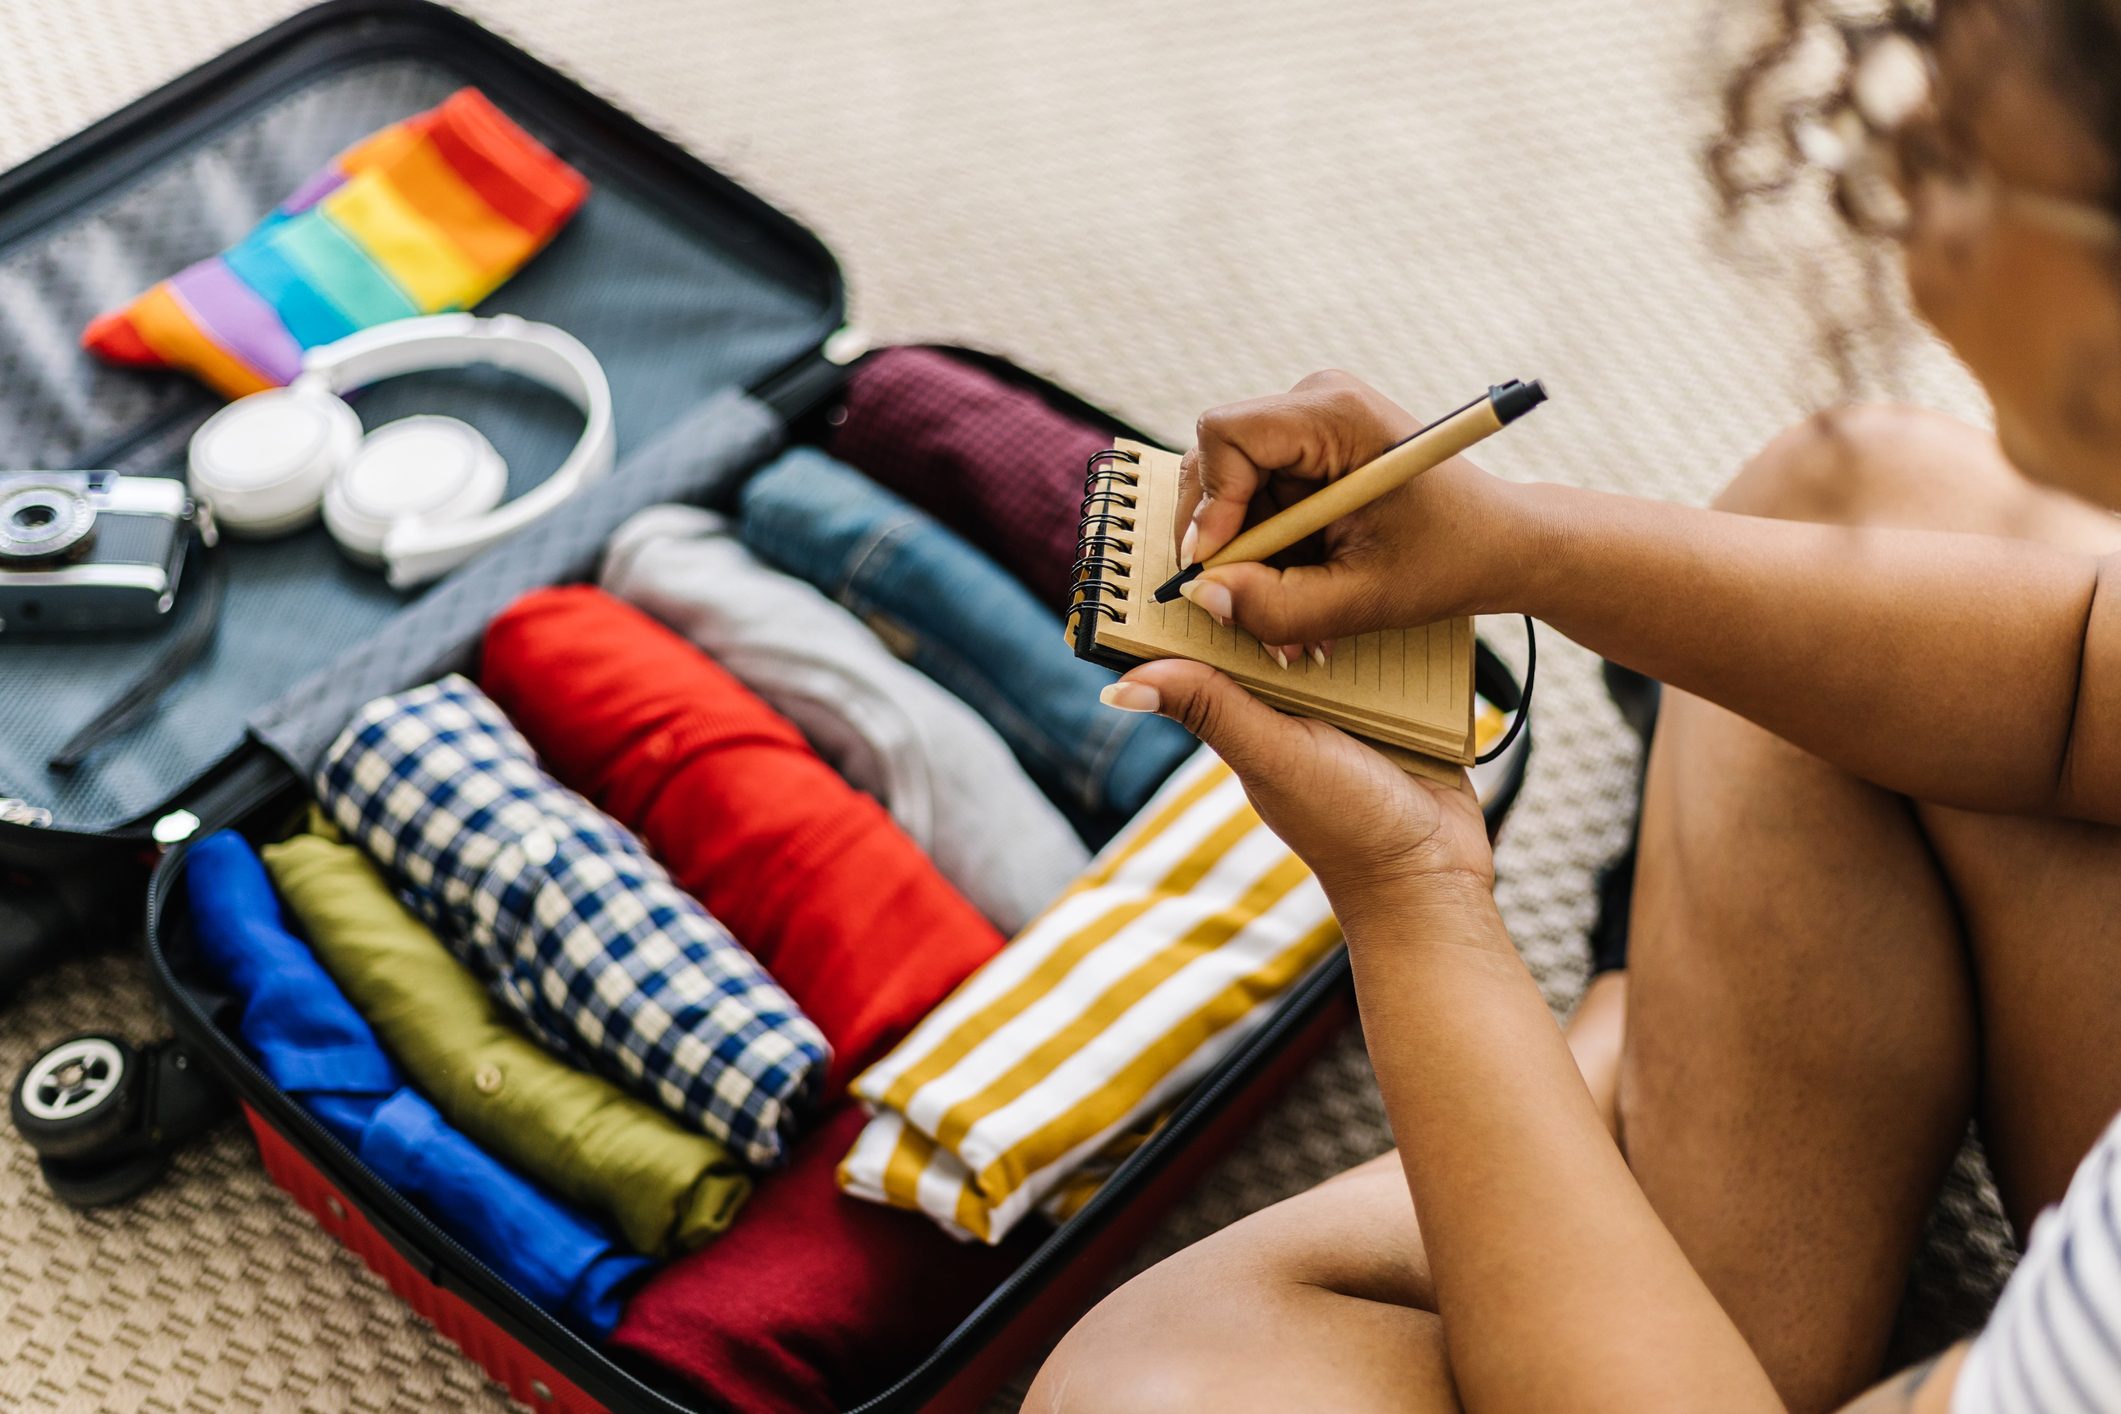 <p>Taking the time to create a <a href="https://www.erincondren.com/packing-list-notepad" rel="noopener noreferrer">packing list</a> (this is different than an <a href="https://www.rd.com/article/the-organized-travelers-checklist/" rel="noopener noreferrer">organized traveler's checklist</a>) a week or two before your trip is one of the best packing tips because it makes certain you don't forget anything and saves you time later on. Starting early ensures you'll be able to purchase things you still need or place an <a href="https://www.rd.com/list/amazon-products-with-perfect-reviews/" rel="noopener noreferrer">Amazon order</a> without last-minute stress.</p> <p>Begin by creating your main categories (clothing, toiletries, charging accessories, documents, etc.). Under each category, list the items you want to bring—and get specific. How many times can you wear a specific top? Which days will you actually be at the beach and need swimwear? Do you anticipate needing sneakers? If you consider yourself an overpacker (or don't want to incur hefty baggage fees), packing lists help you <a href="https://www.rd.com/list/10-ways-to-pack-lighter-when-you-travel/" rel="noopener noreferrer">pack lighter</a>—you've already done the work to build your vacation wardrobe and won't be tempted to add another outfit or two. Plus, you can refer to it when you go home so you don't leave anything in the hotel room or <a href="https://www.rd.com/list/airbnb-rentals-under-100/" rel="noopener noreferrer">Airbnb</a>.</p> <p class="listicle-page__cta-button-shop"><a class="shop-btn" href="https://www.erincondren.com/packing-list-notepad">Shop the Packing List</a></p>